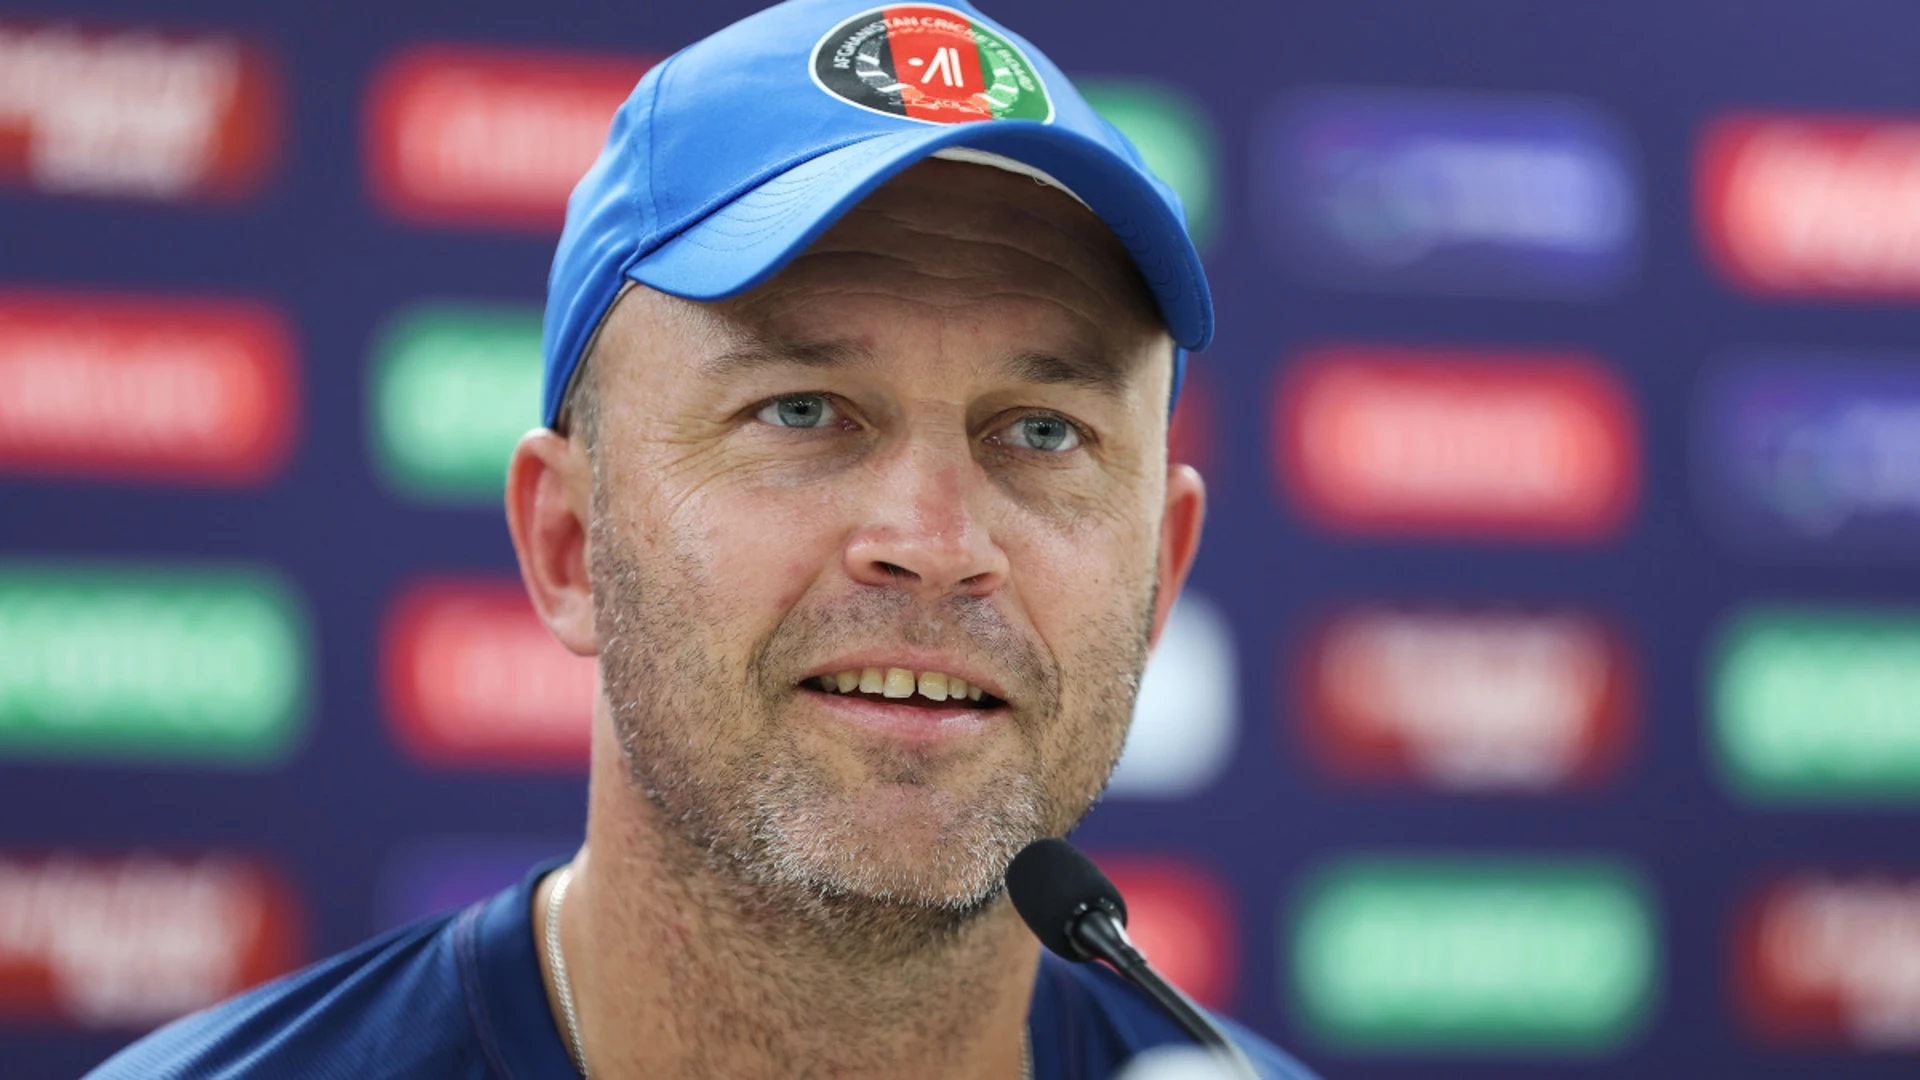 Afghanistan World Cup heroics can inspire next generation: Trott